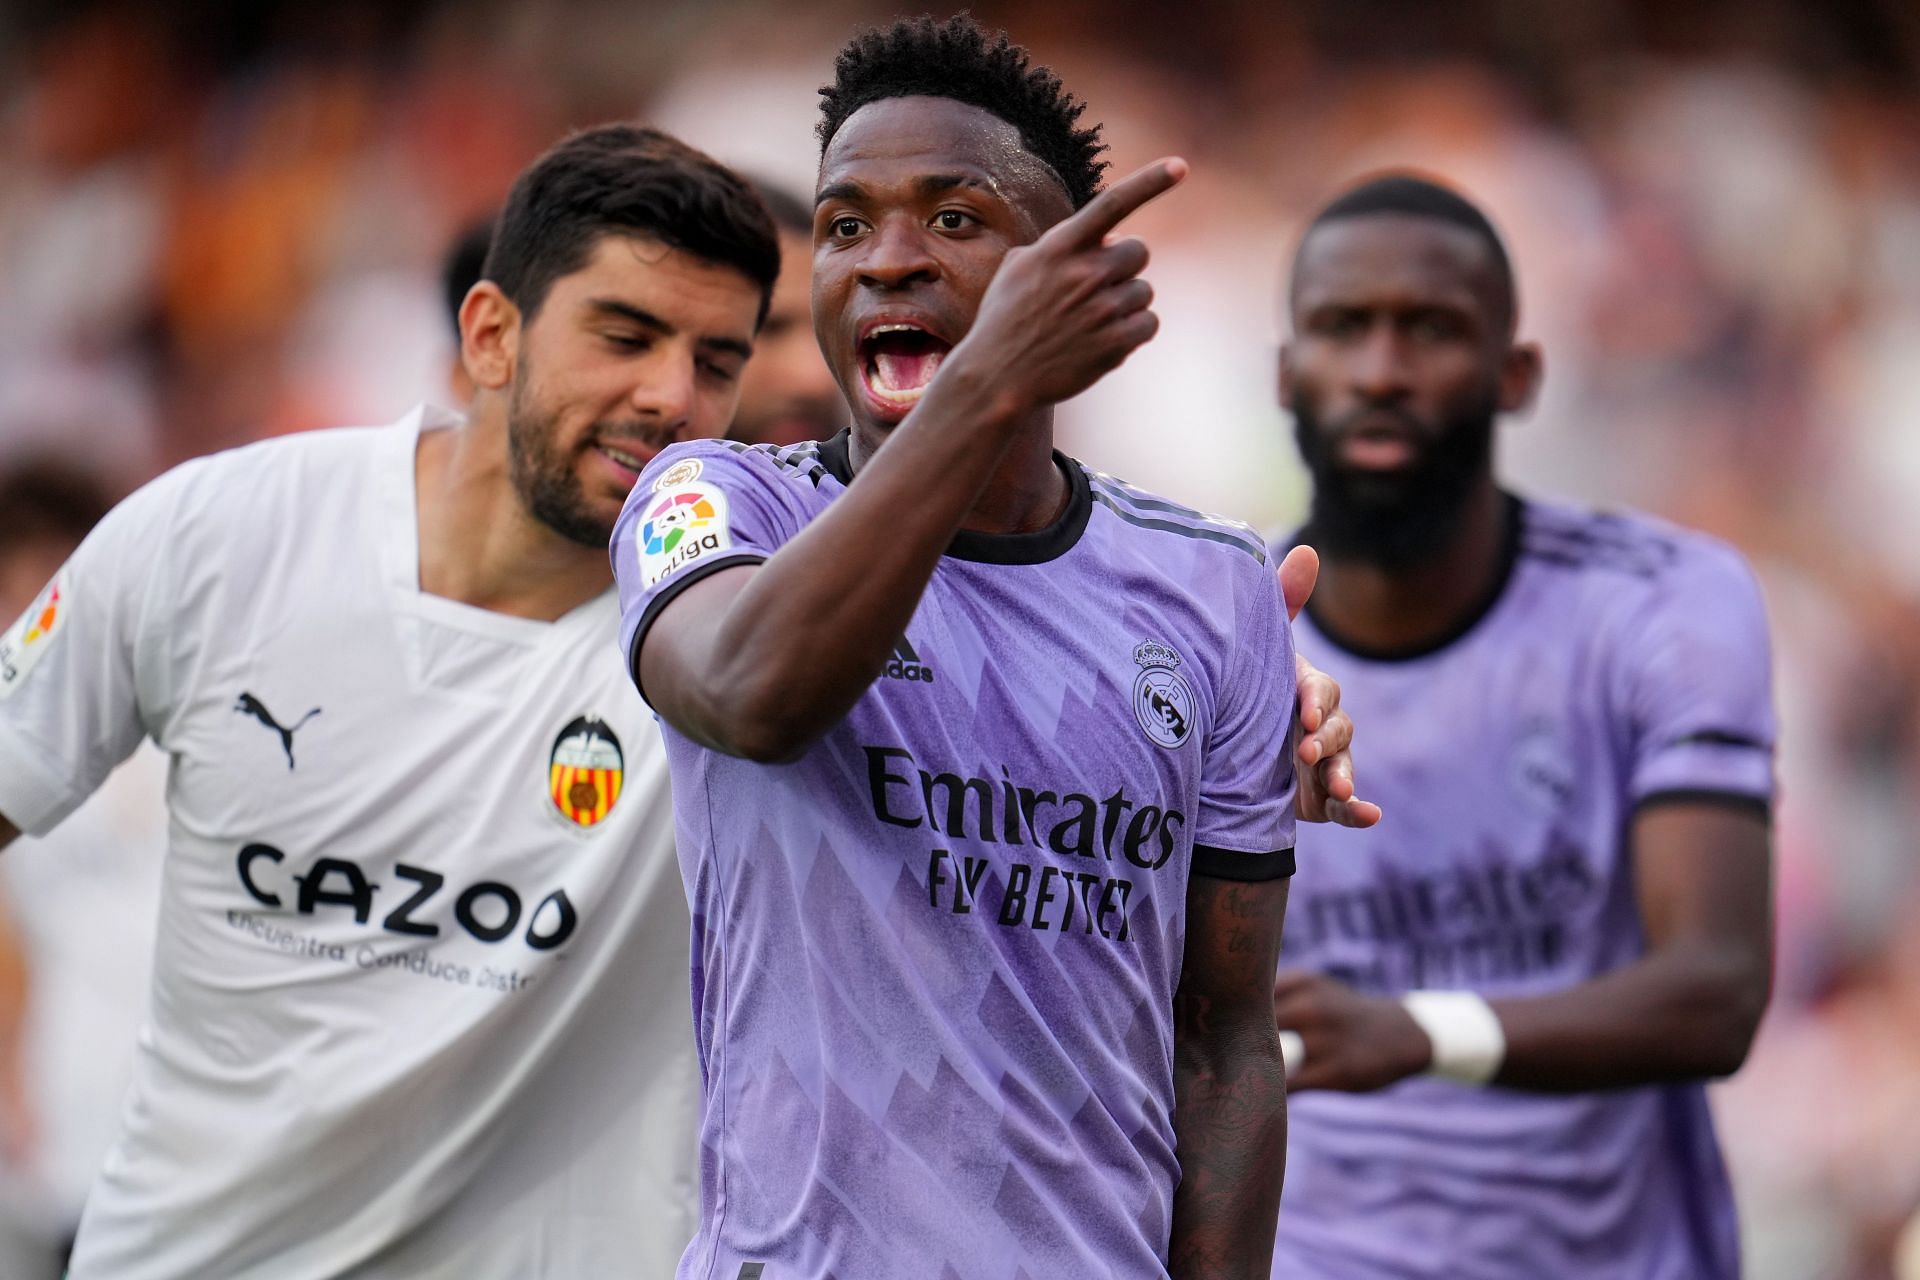 The Madrid attacker has been targeted with racist abuse in La Liga.